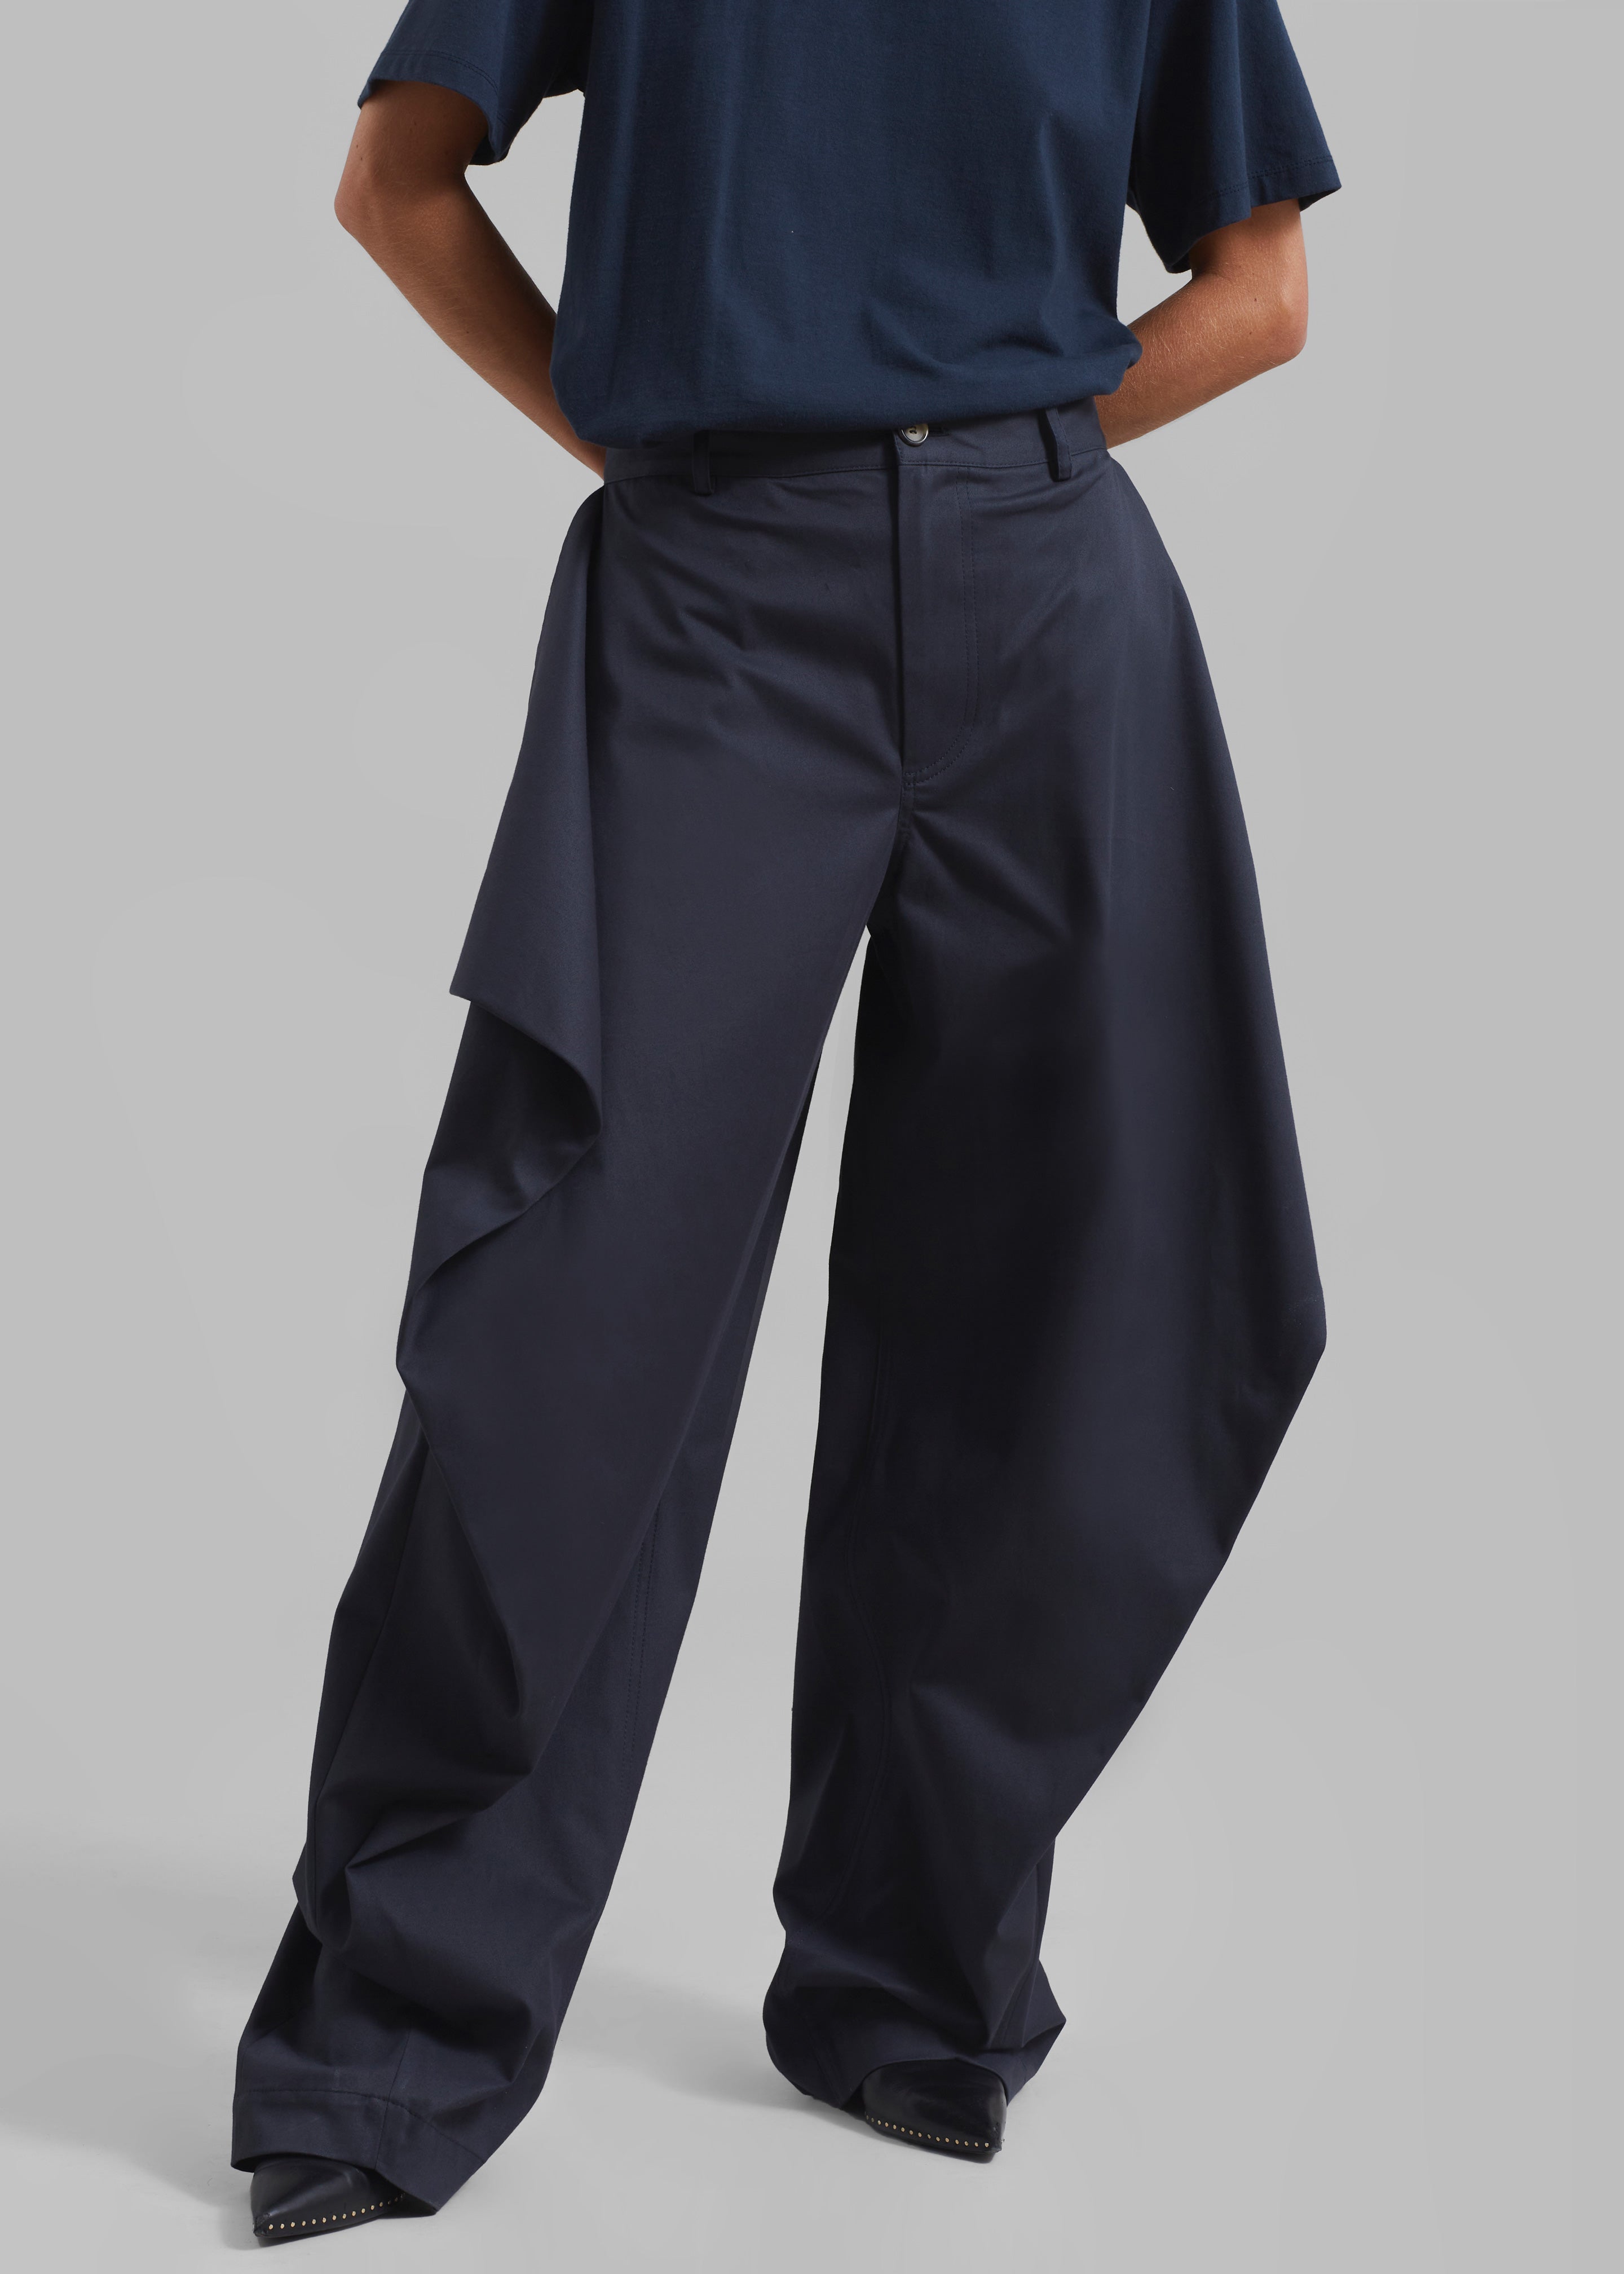 JW Anderson Kite Trousers - Navy - 2